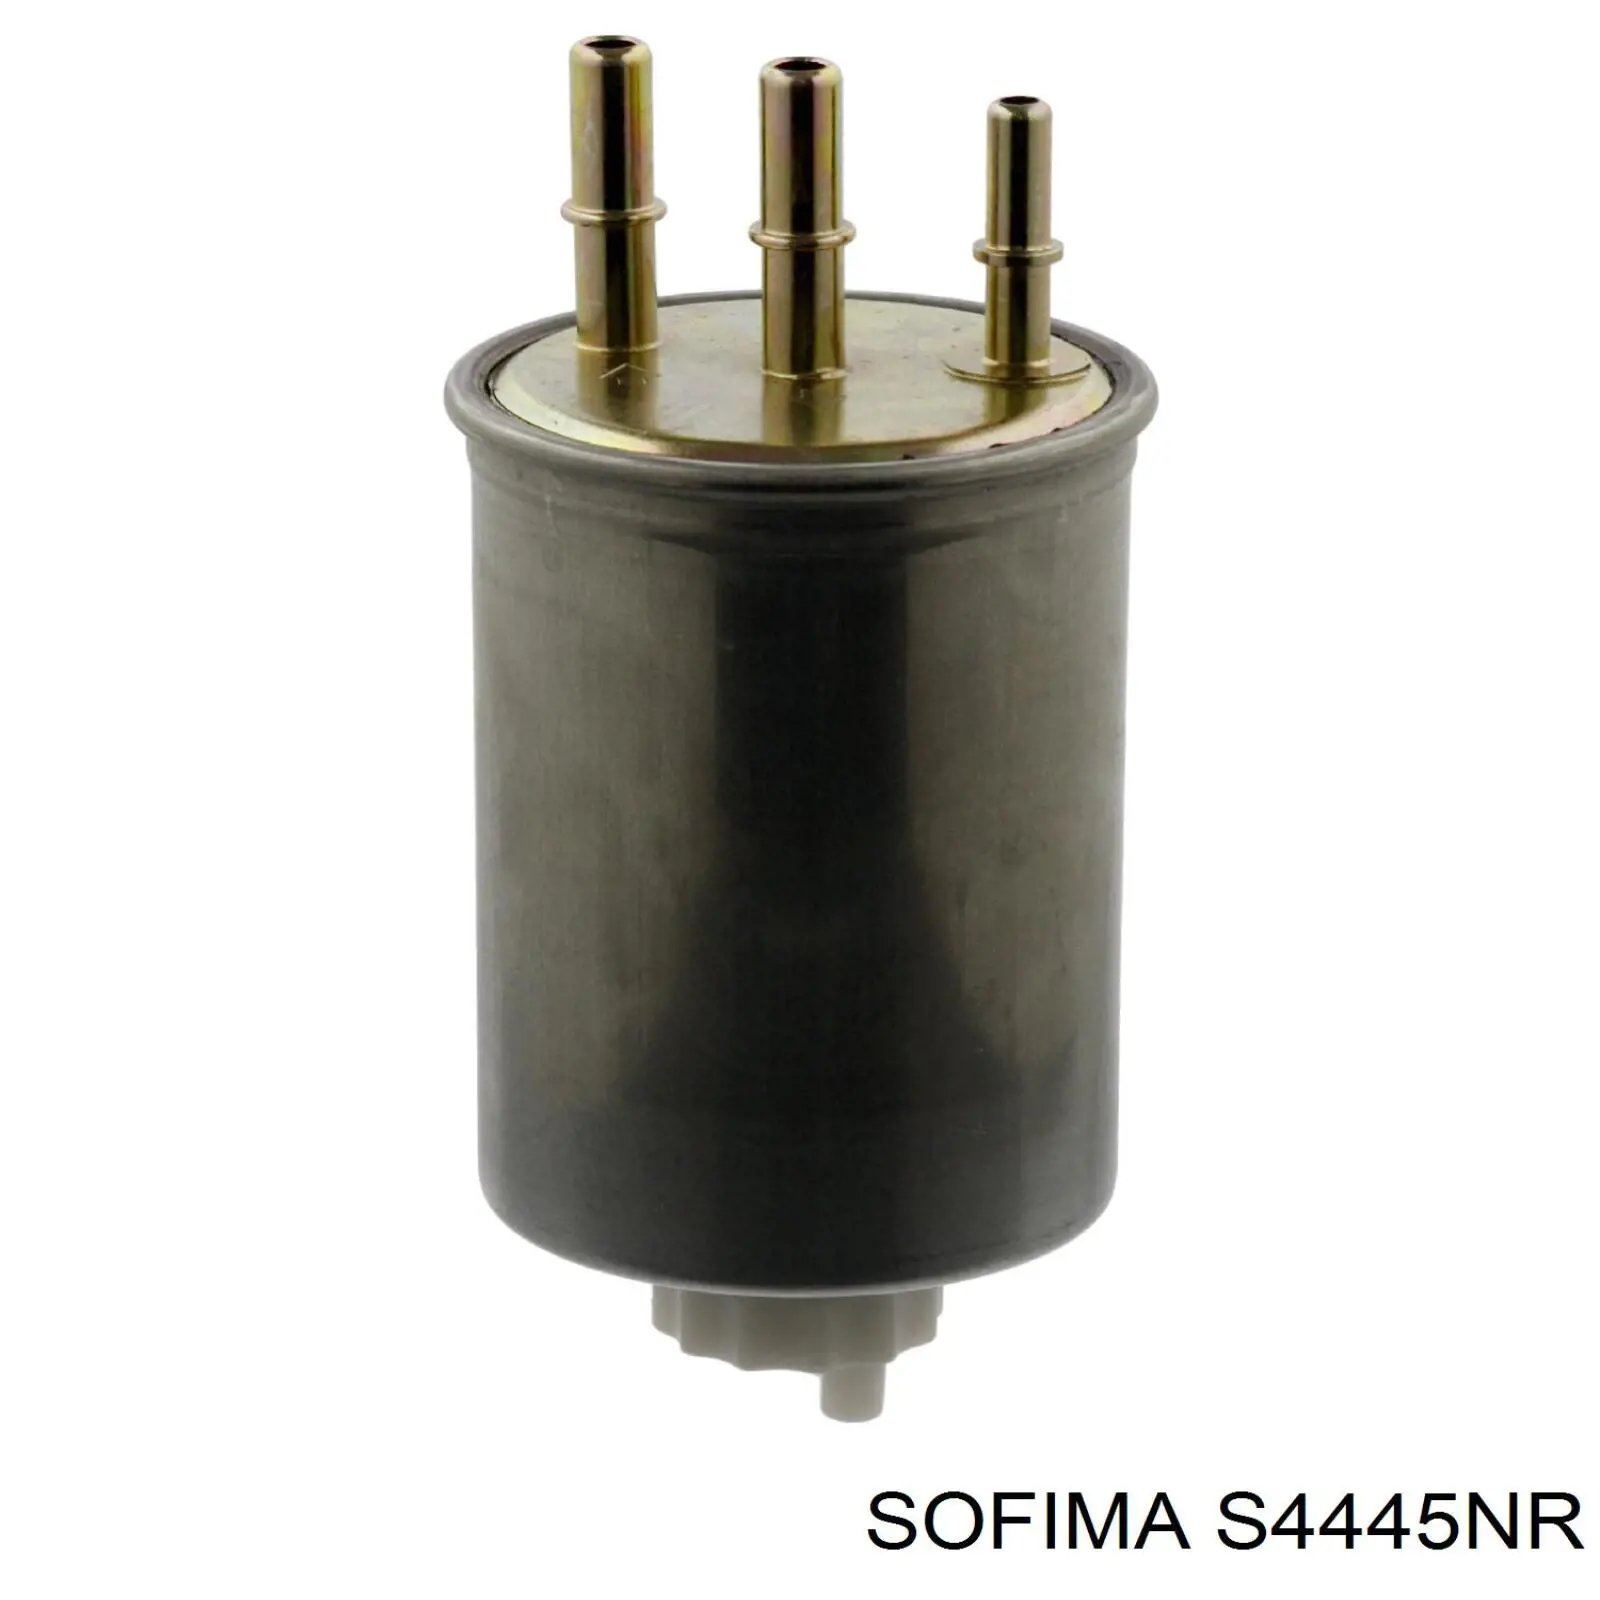 S 4445 NR Sofima filtro combustible